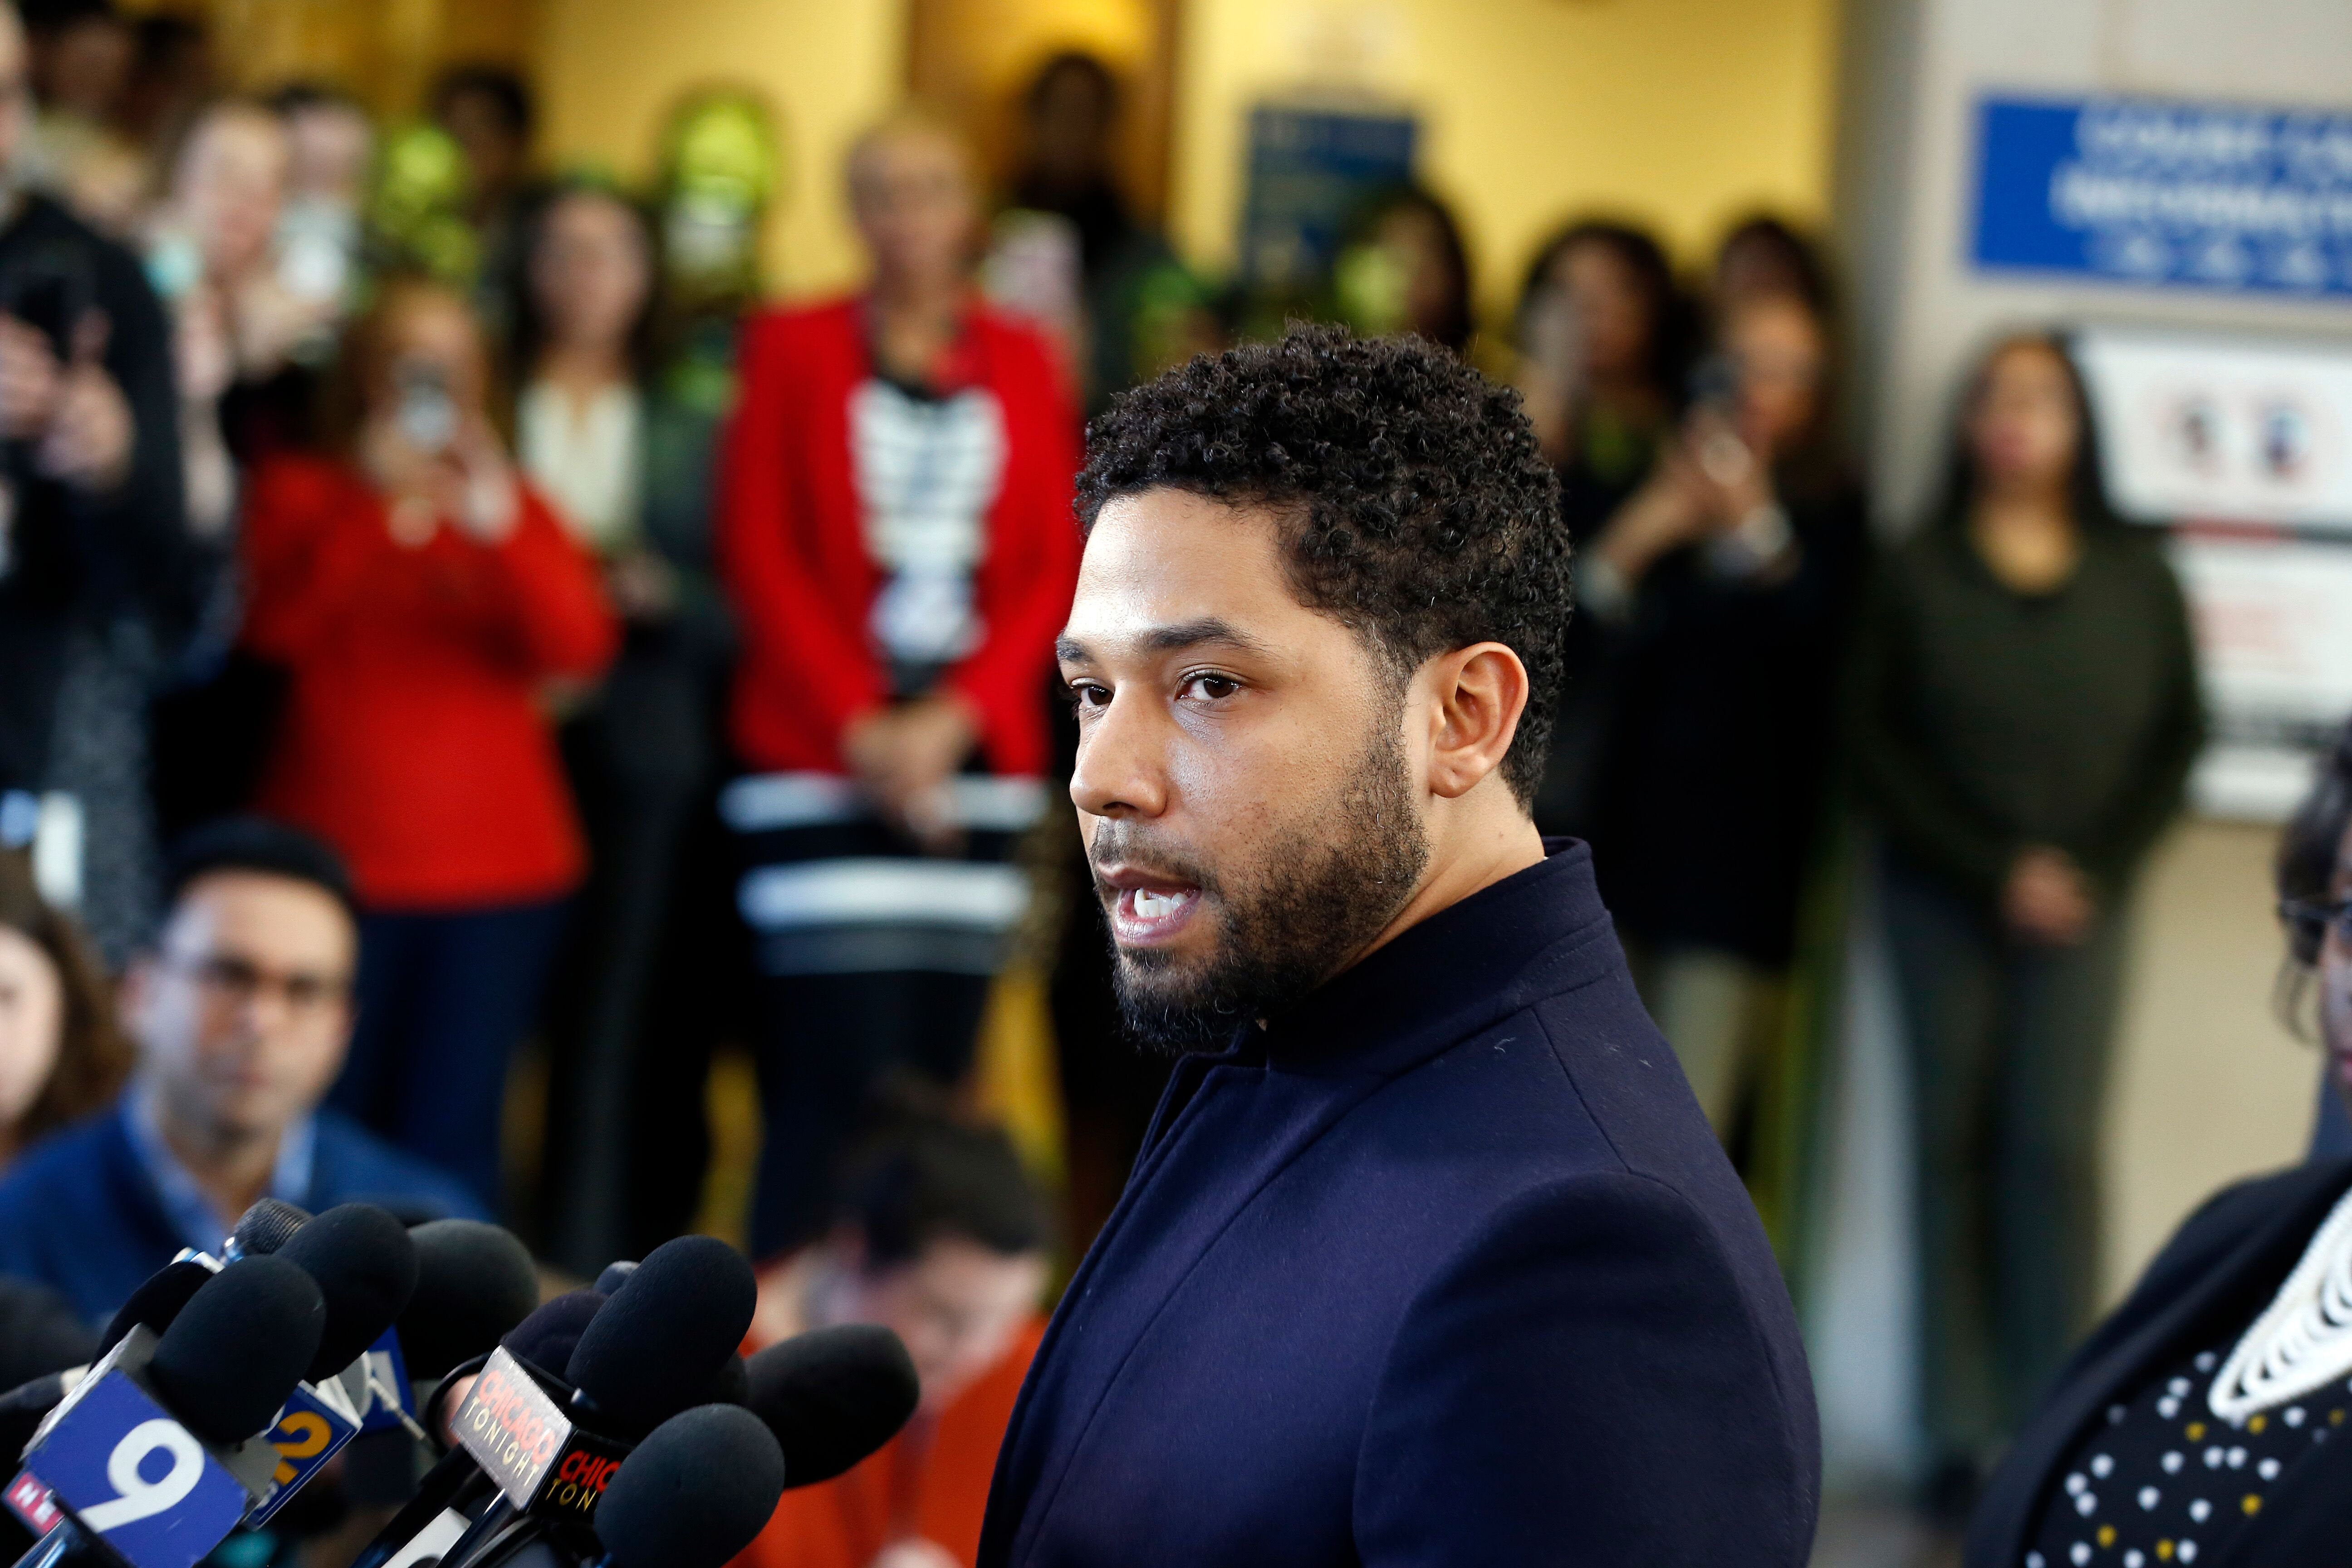 Jussie Smollett leaves after his court appearance at Leighton Courthouse in Chicago in March 2019. | Photo: Getty Images/GlobalImagesUkraine